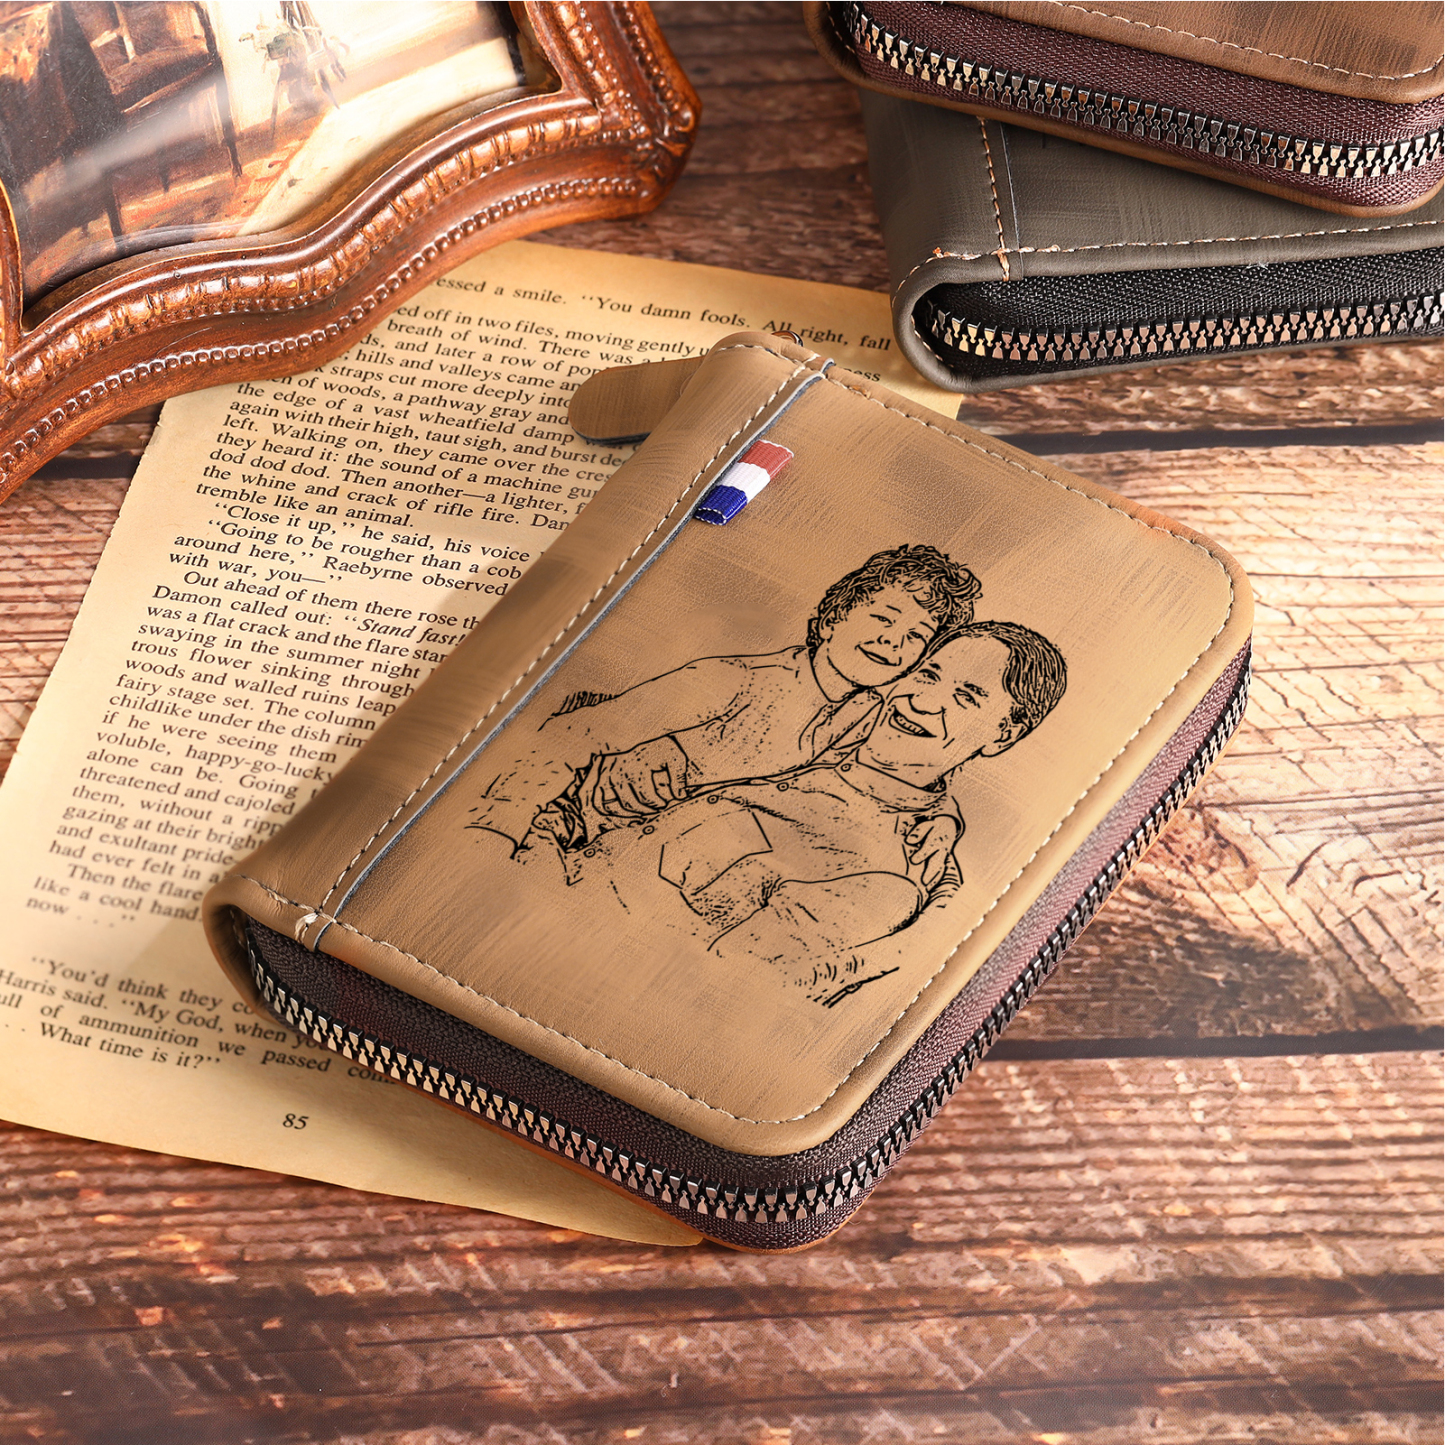 7 Names - Personalized Photo Text Custom Leather Men's Wallet Custom Name Zipper Wallet for Dad